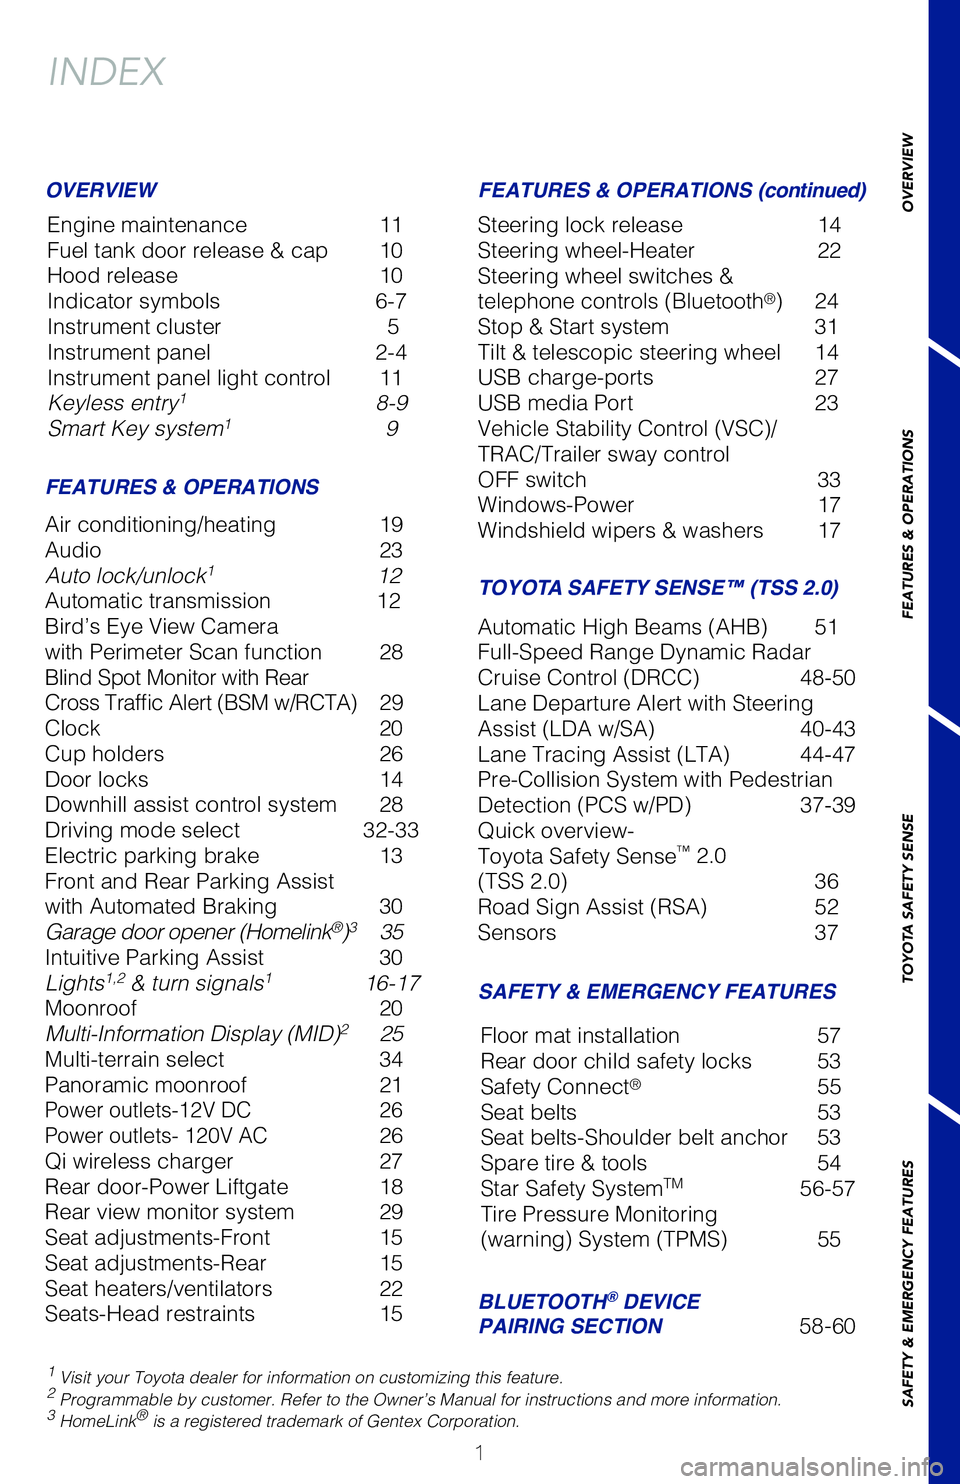 TOYOTA RAV4 2020  Owners Manual (in English) 1
OVERVIEW FEATURES & OPERATIONS TOYOTA SAFETY SENSE SAFETY & EMERGENCY FEATURES
INDEX
Engine maintenance  11
Fuel tank door release & cap  10
Hood release  10
Indicator symbols  6-7
Instrument cluste